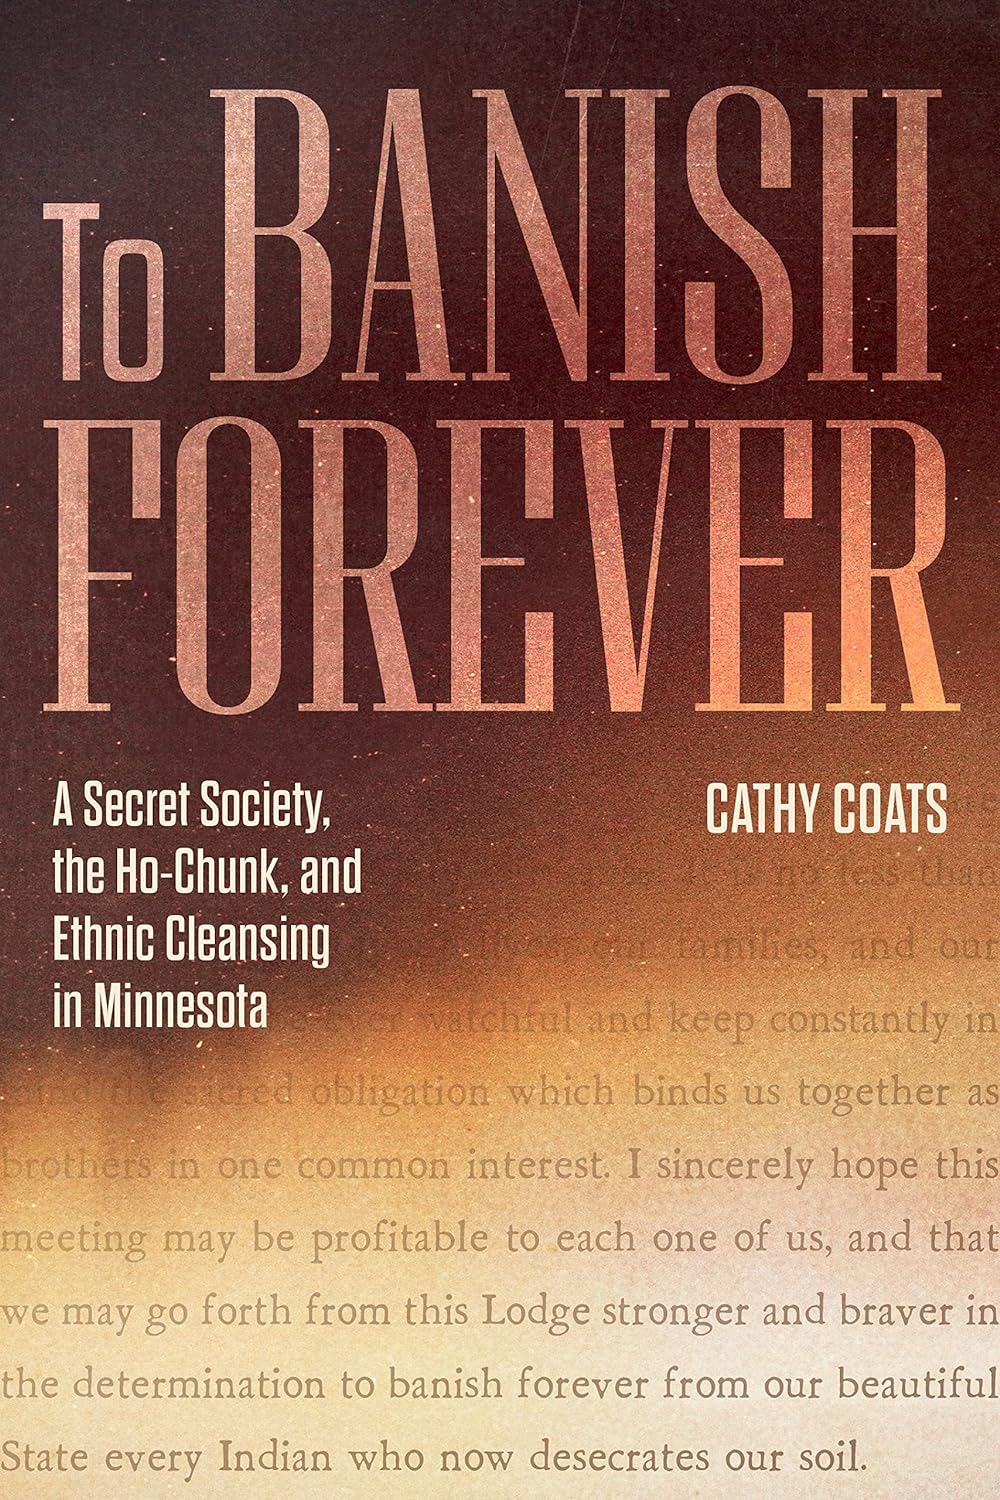 To Banish Forever: A Secret Society, the Ho-Chunk, and Ethnic Cleansing in Minnesota by Cathy Coats